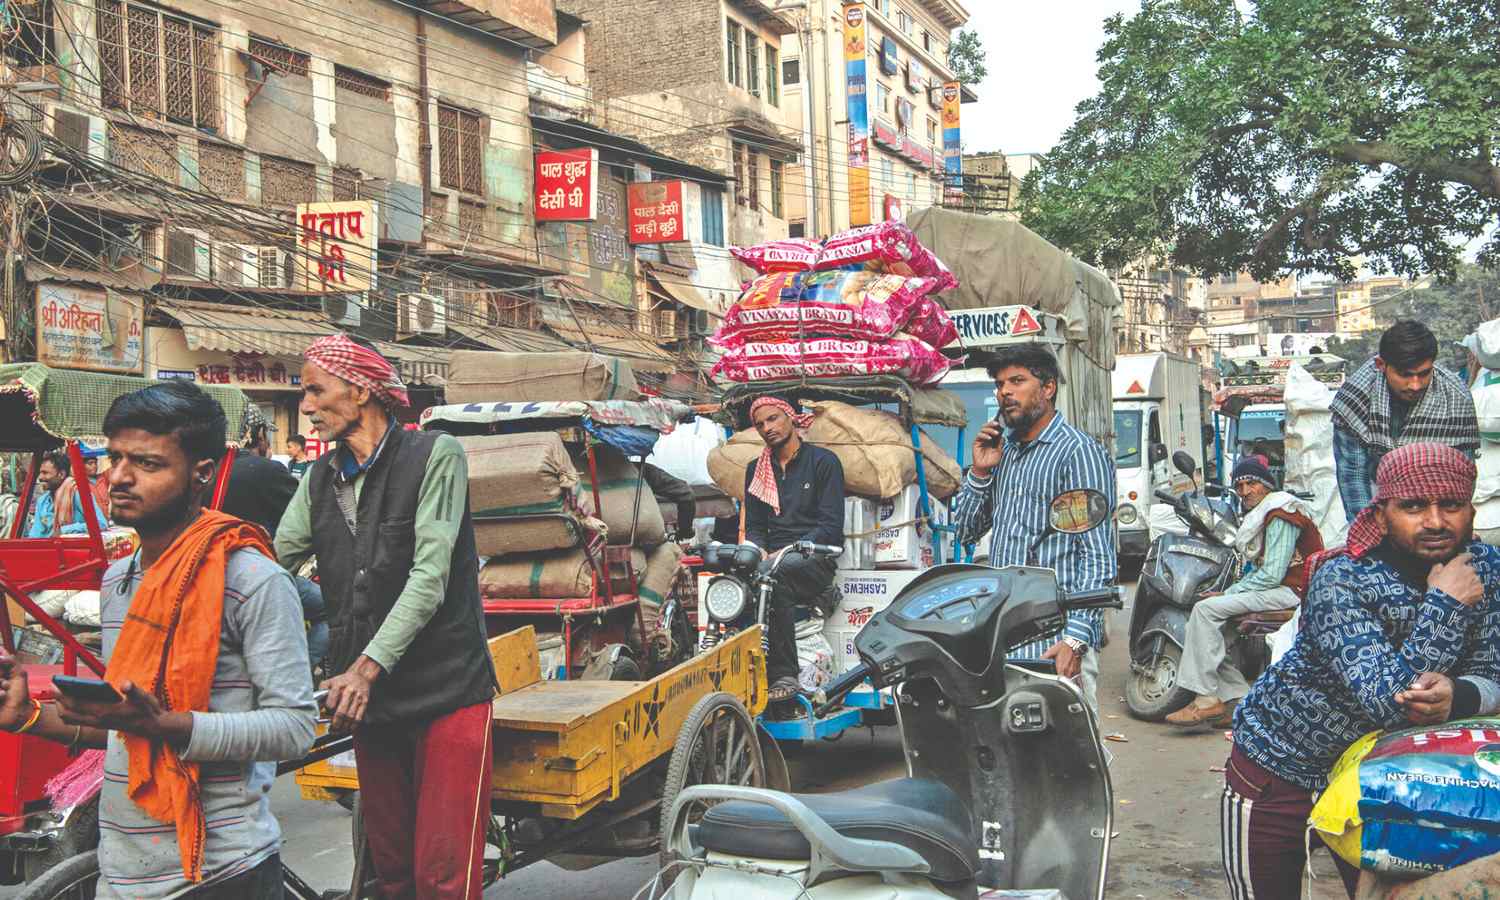 India Chasing Chinas Crown The race for the worlds top consumer market